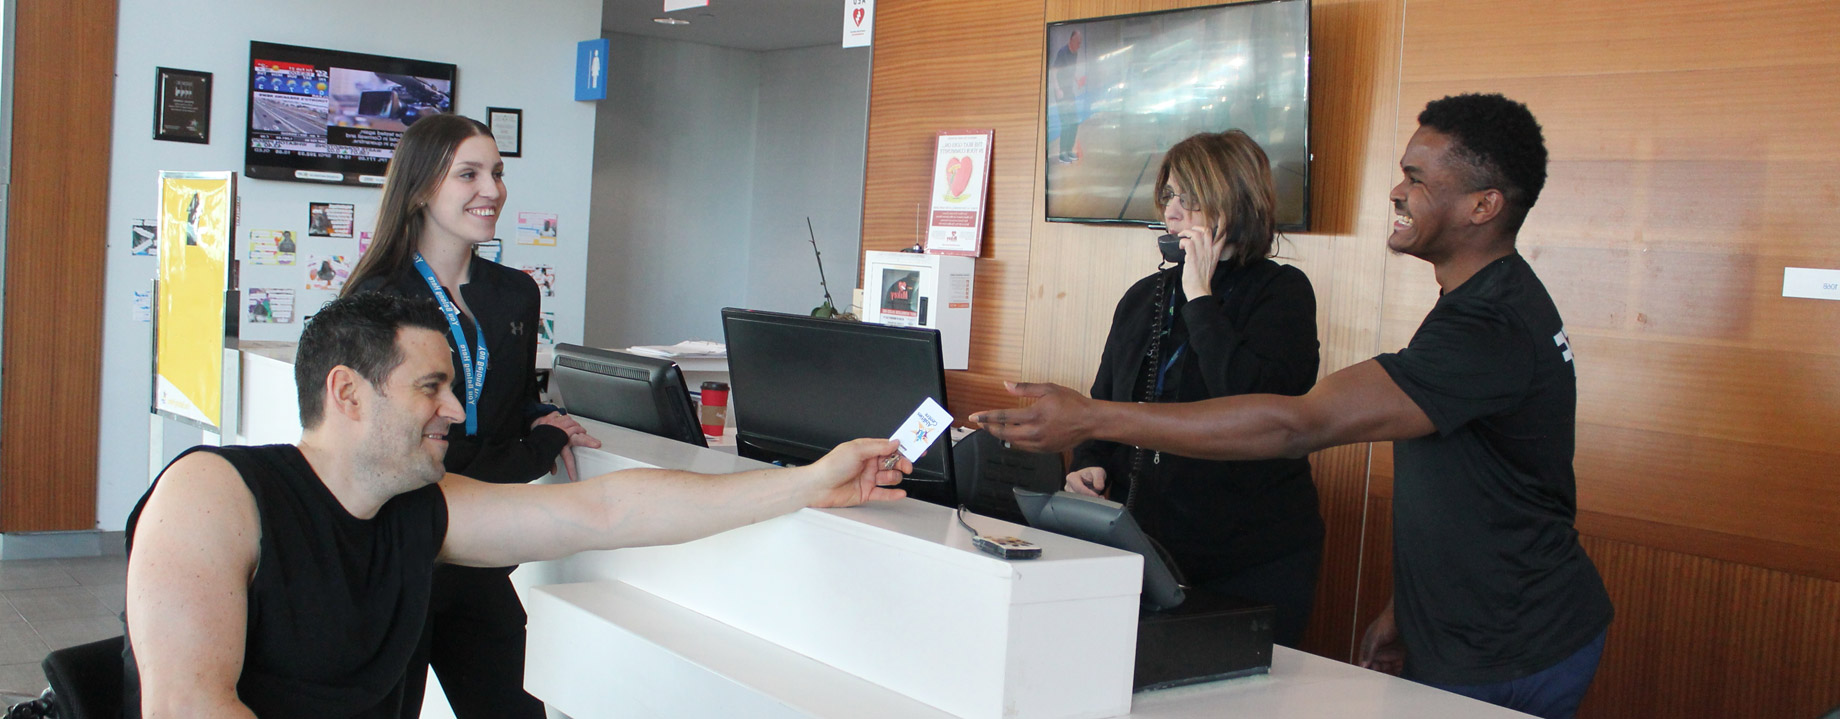 Member greeted by friendly Abilities Centre front desk staff